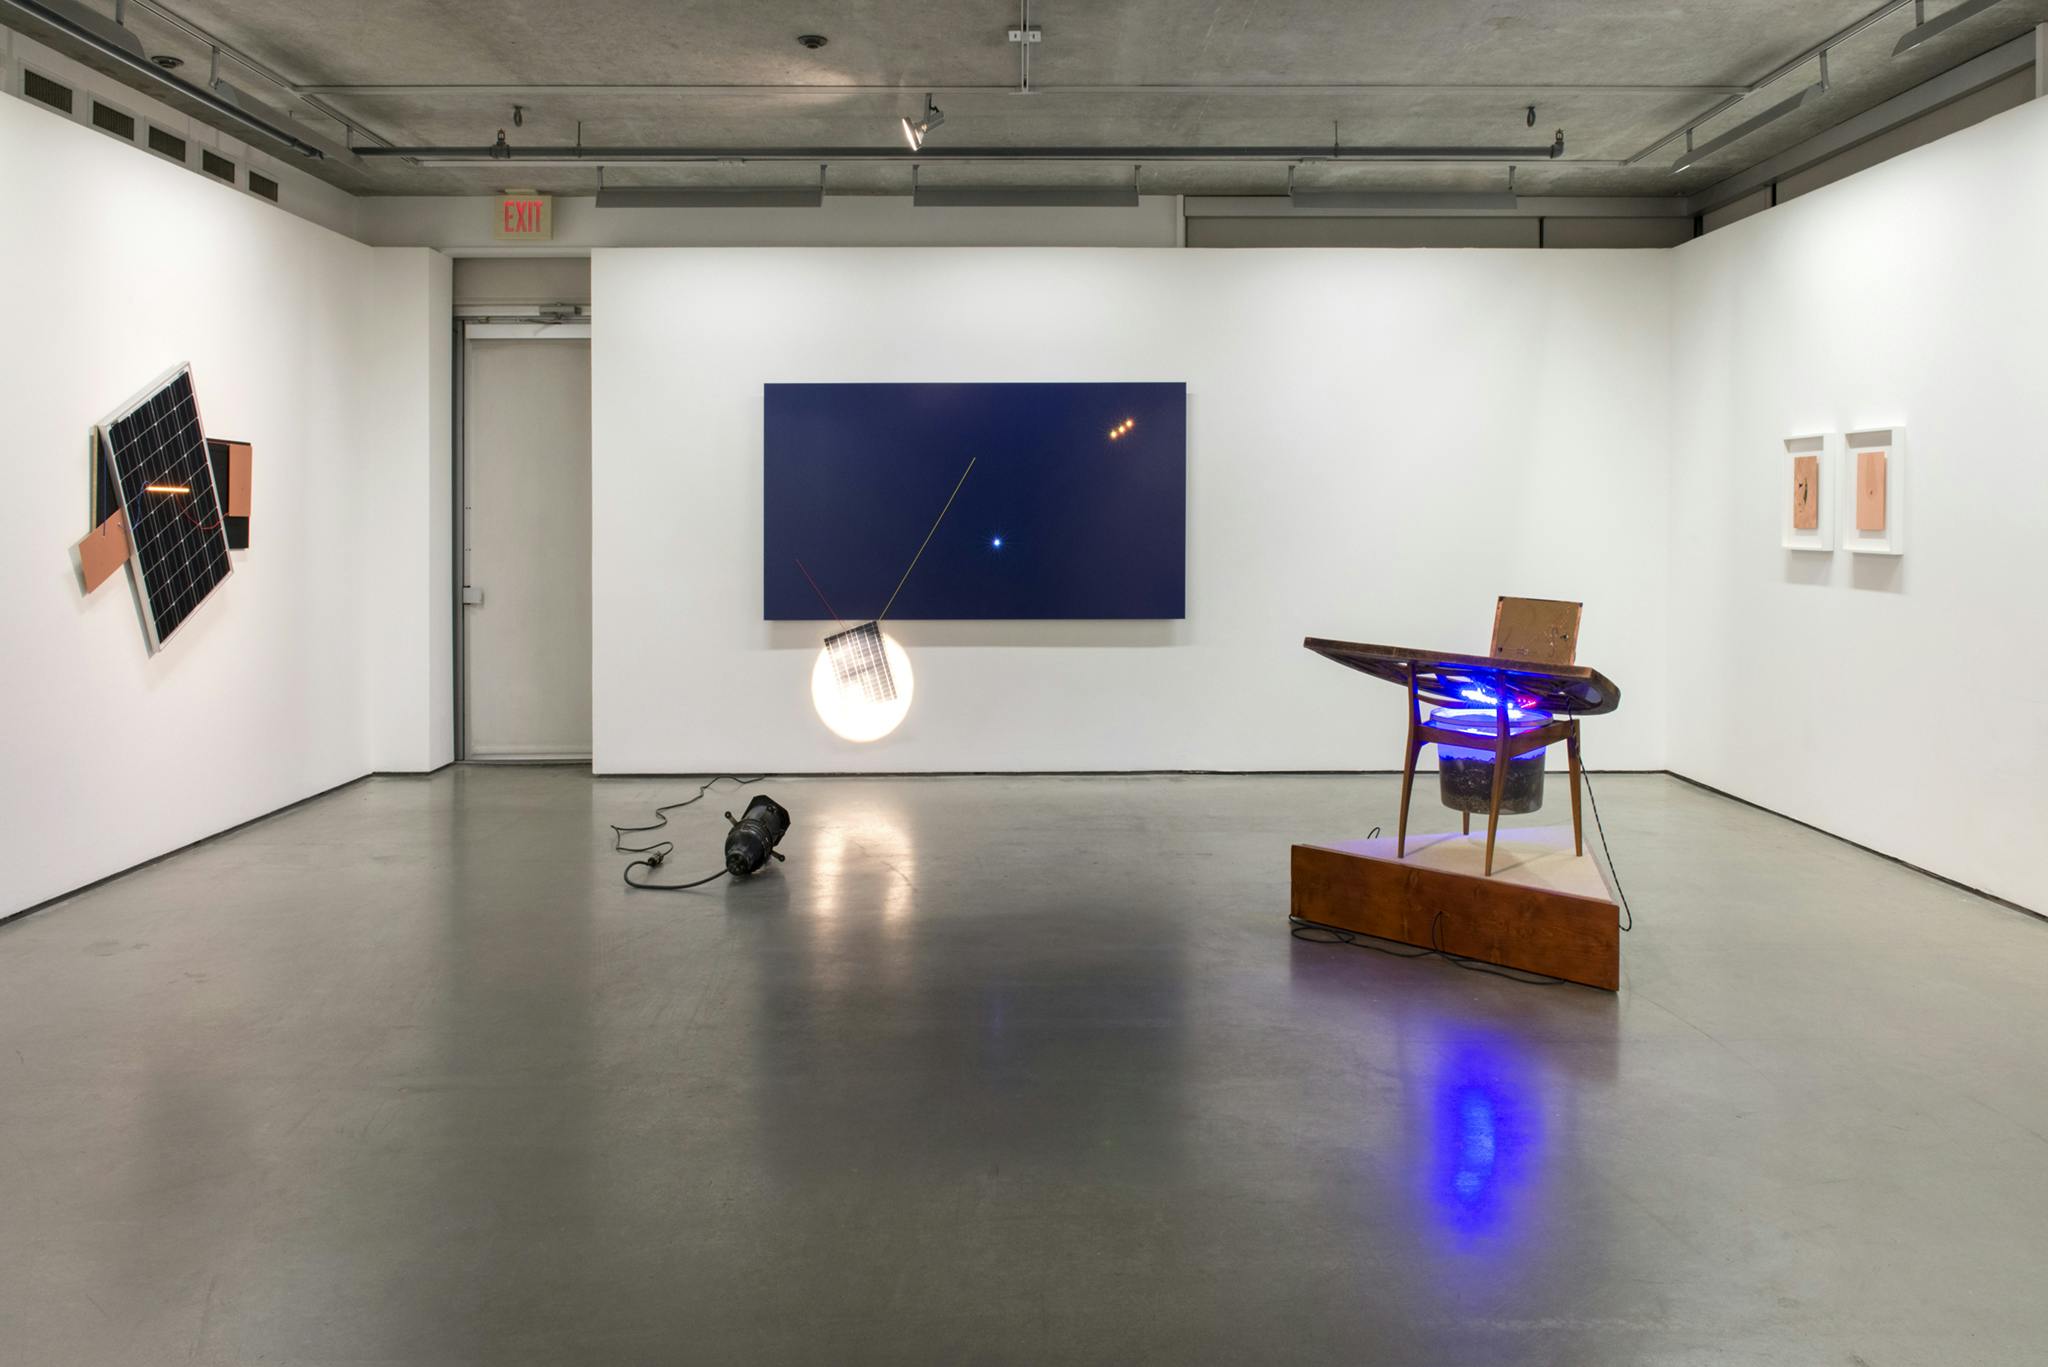 Various multimedia works are installed throughout a gallery. A sculpture resembling a desk chair on a triangular plinth foregrounds three multimedia artworks hanging on three gallery walls.